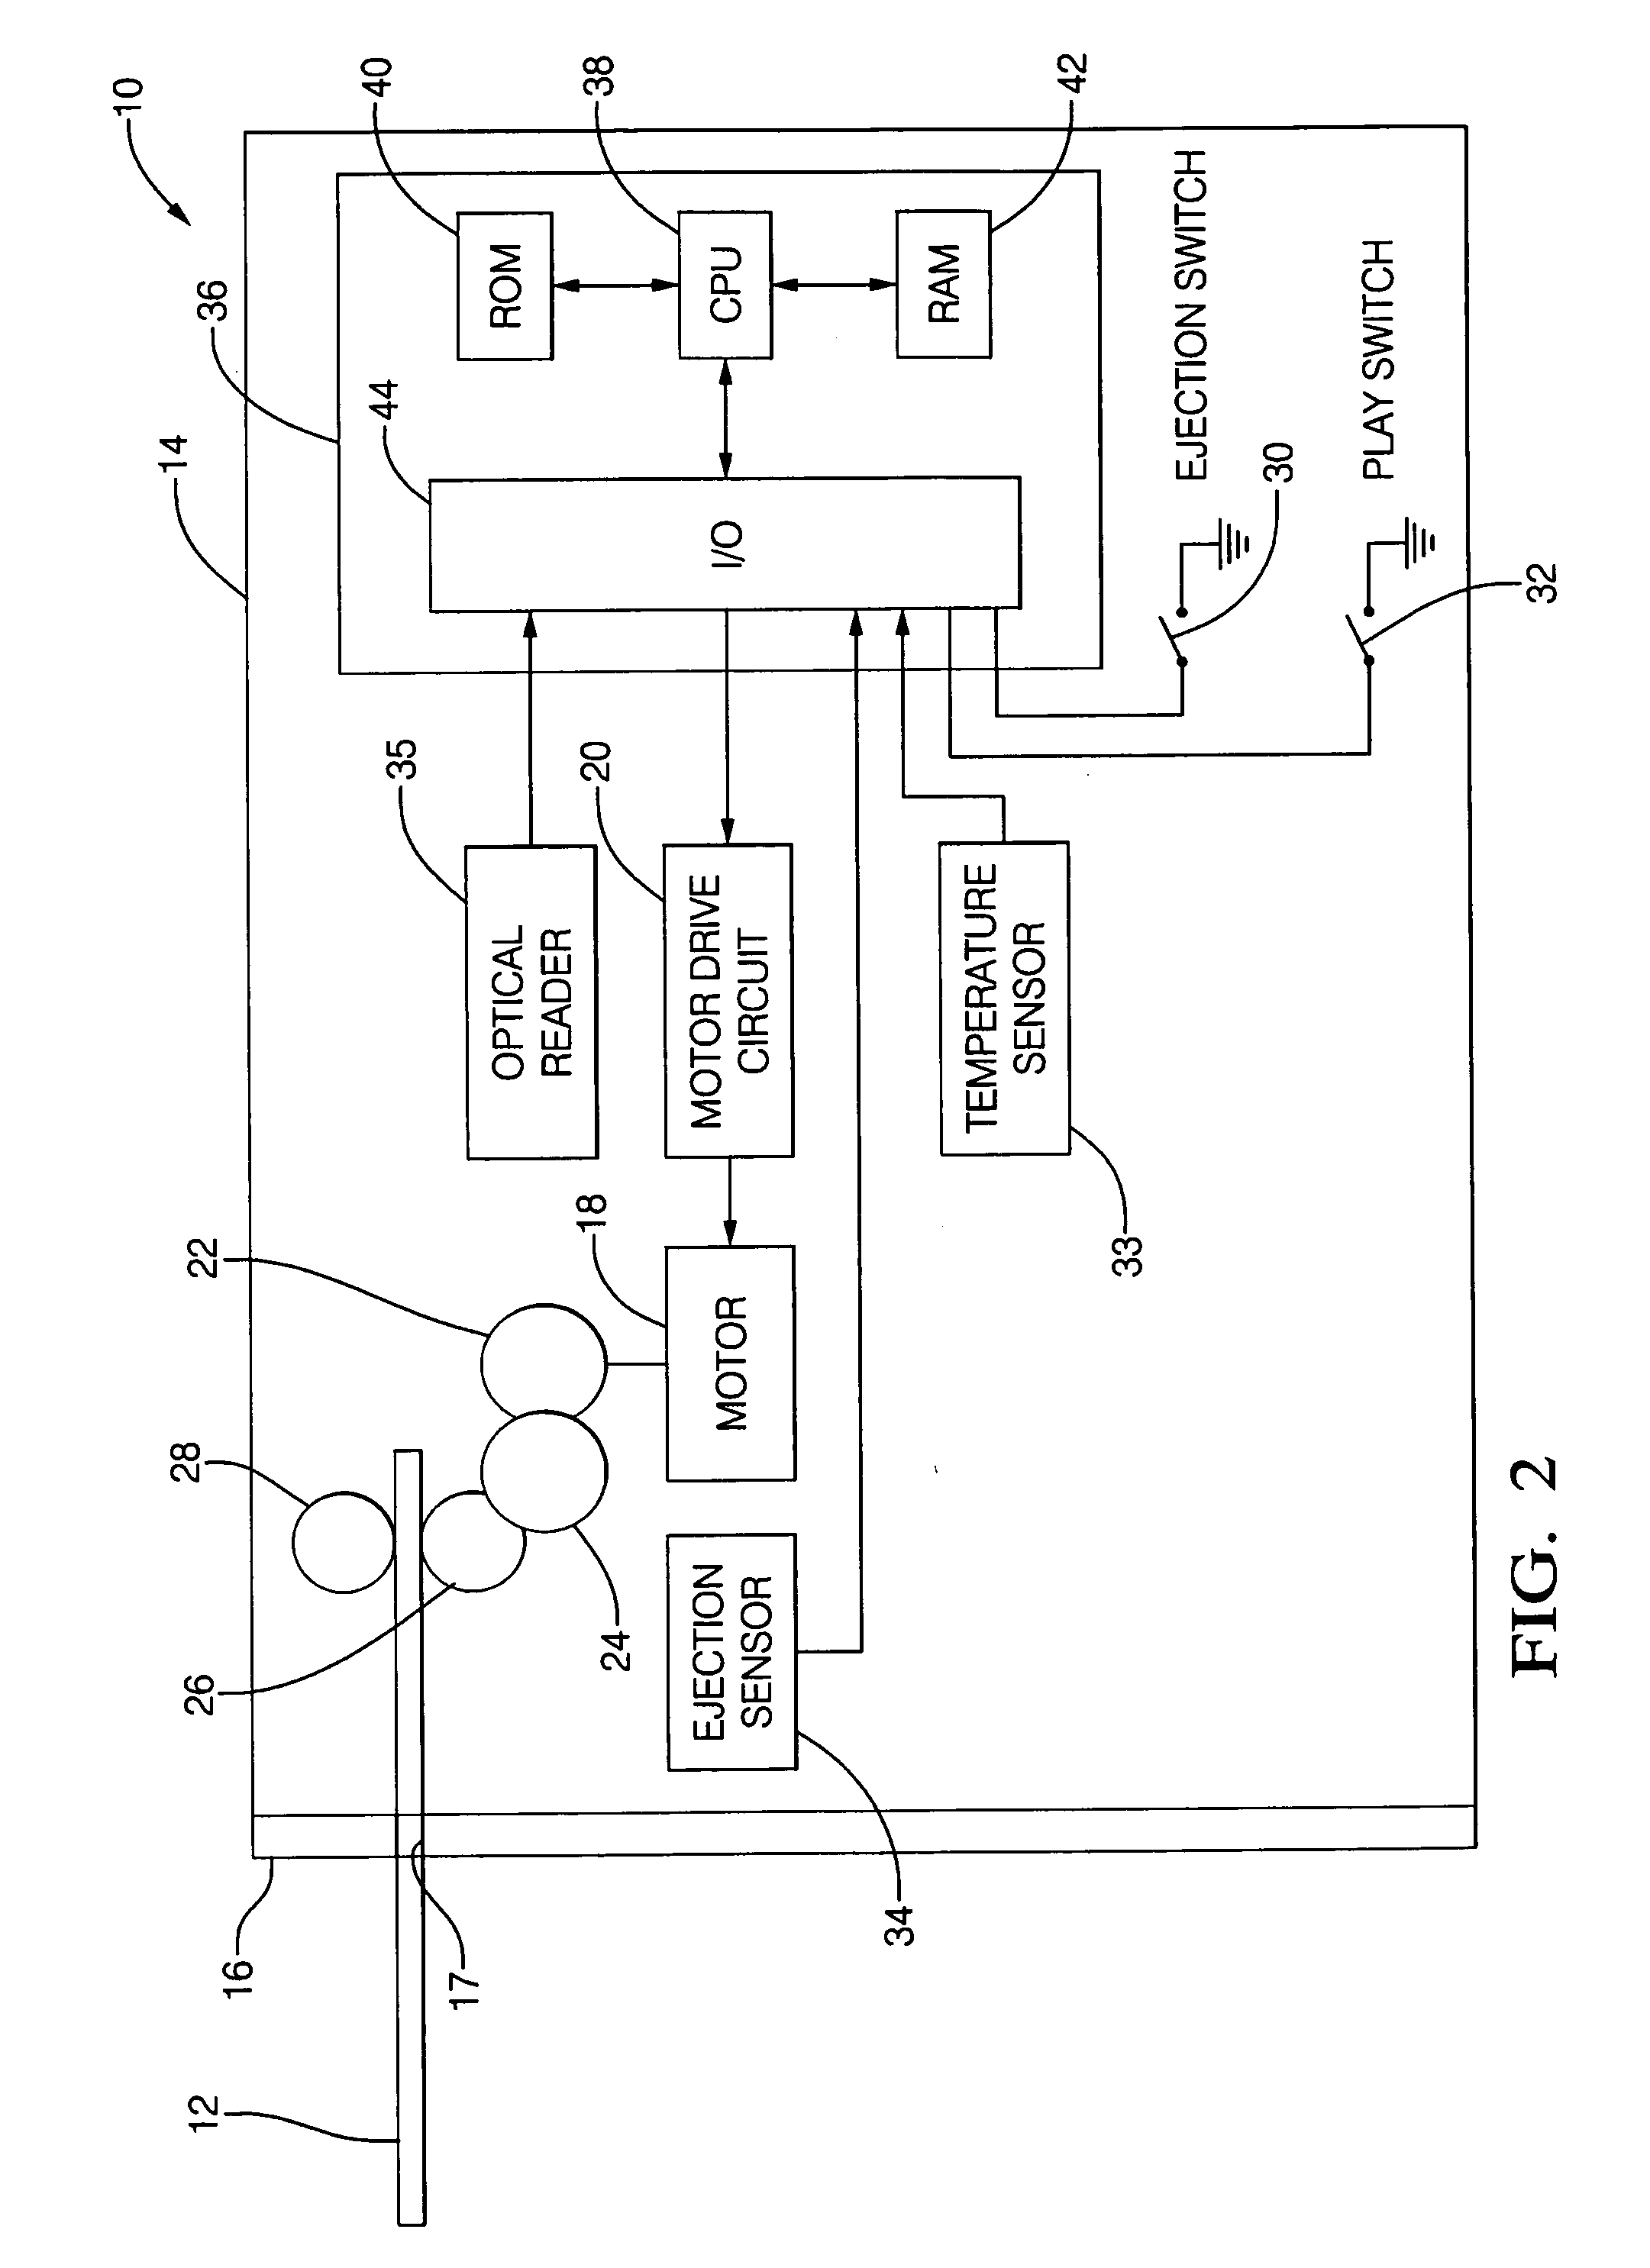 Compact disc player and method for controlling ejection of a compact disc from the compact disc player